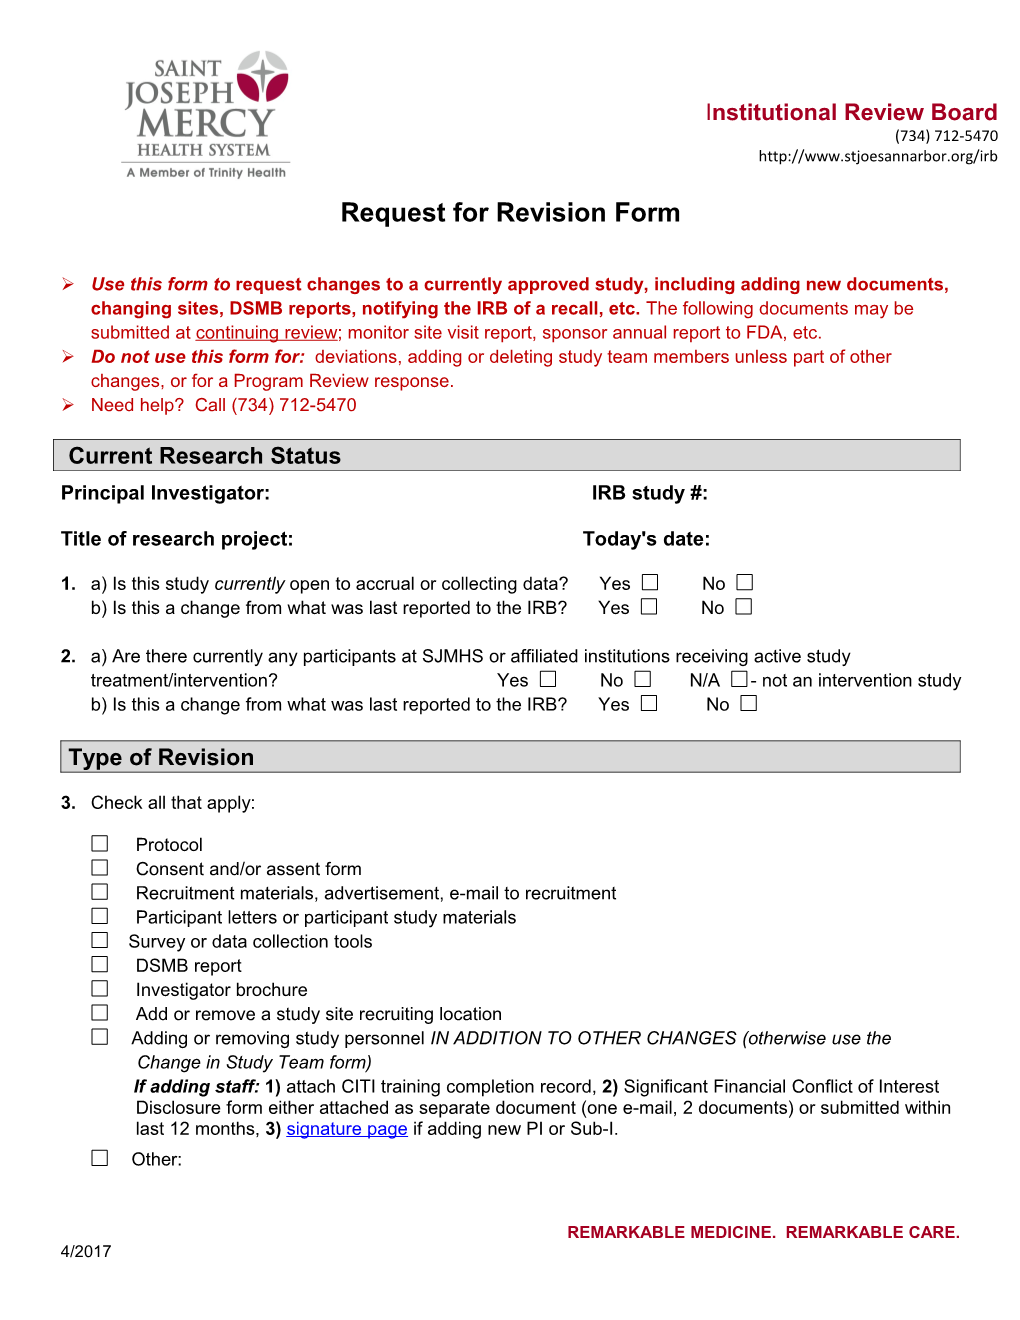 Request for Revision Form